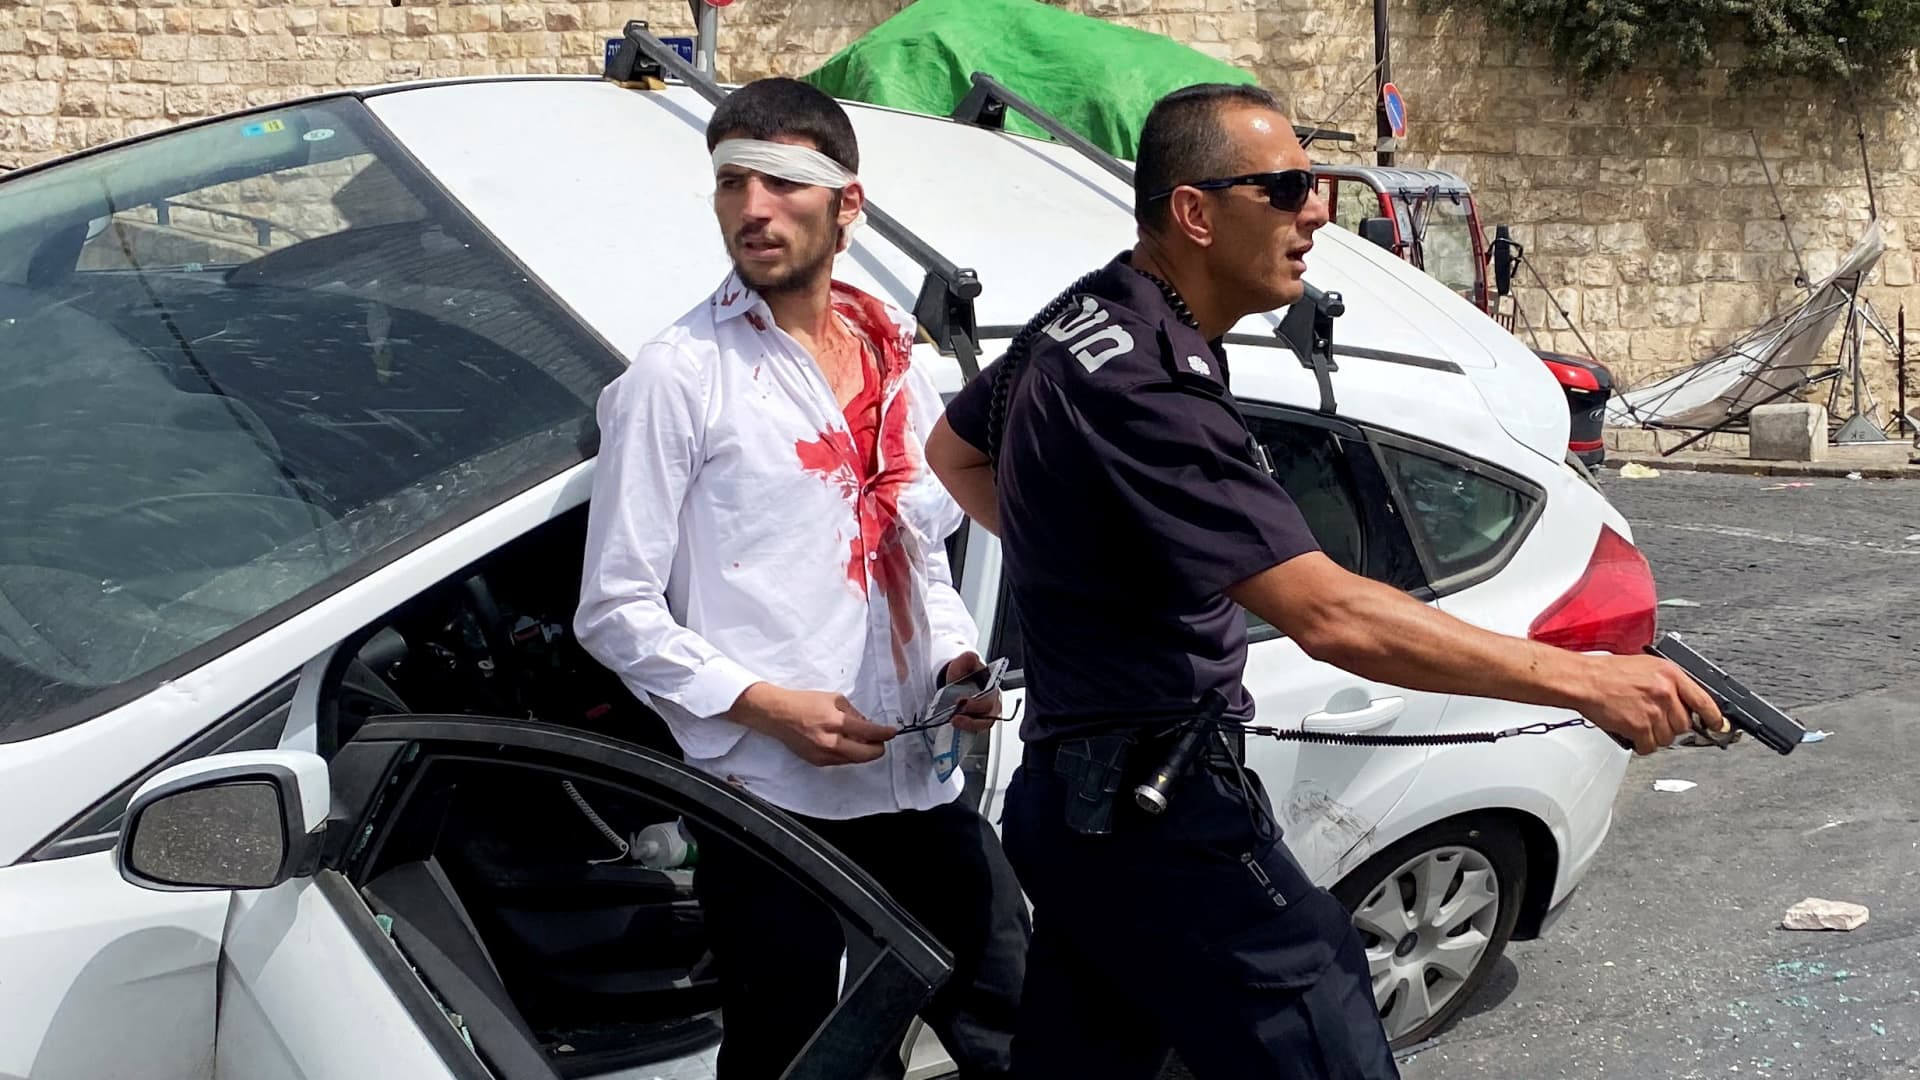 An Israeli police officer holds his weapon as he stands in front of an injured Israeli driver moments after witnesses said his car crashed into a Palestinian on a pavement during stone-throwing clashes near Lion's Gate just outside Jerusalem's Old City May 10, 2021.